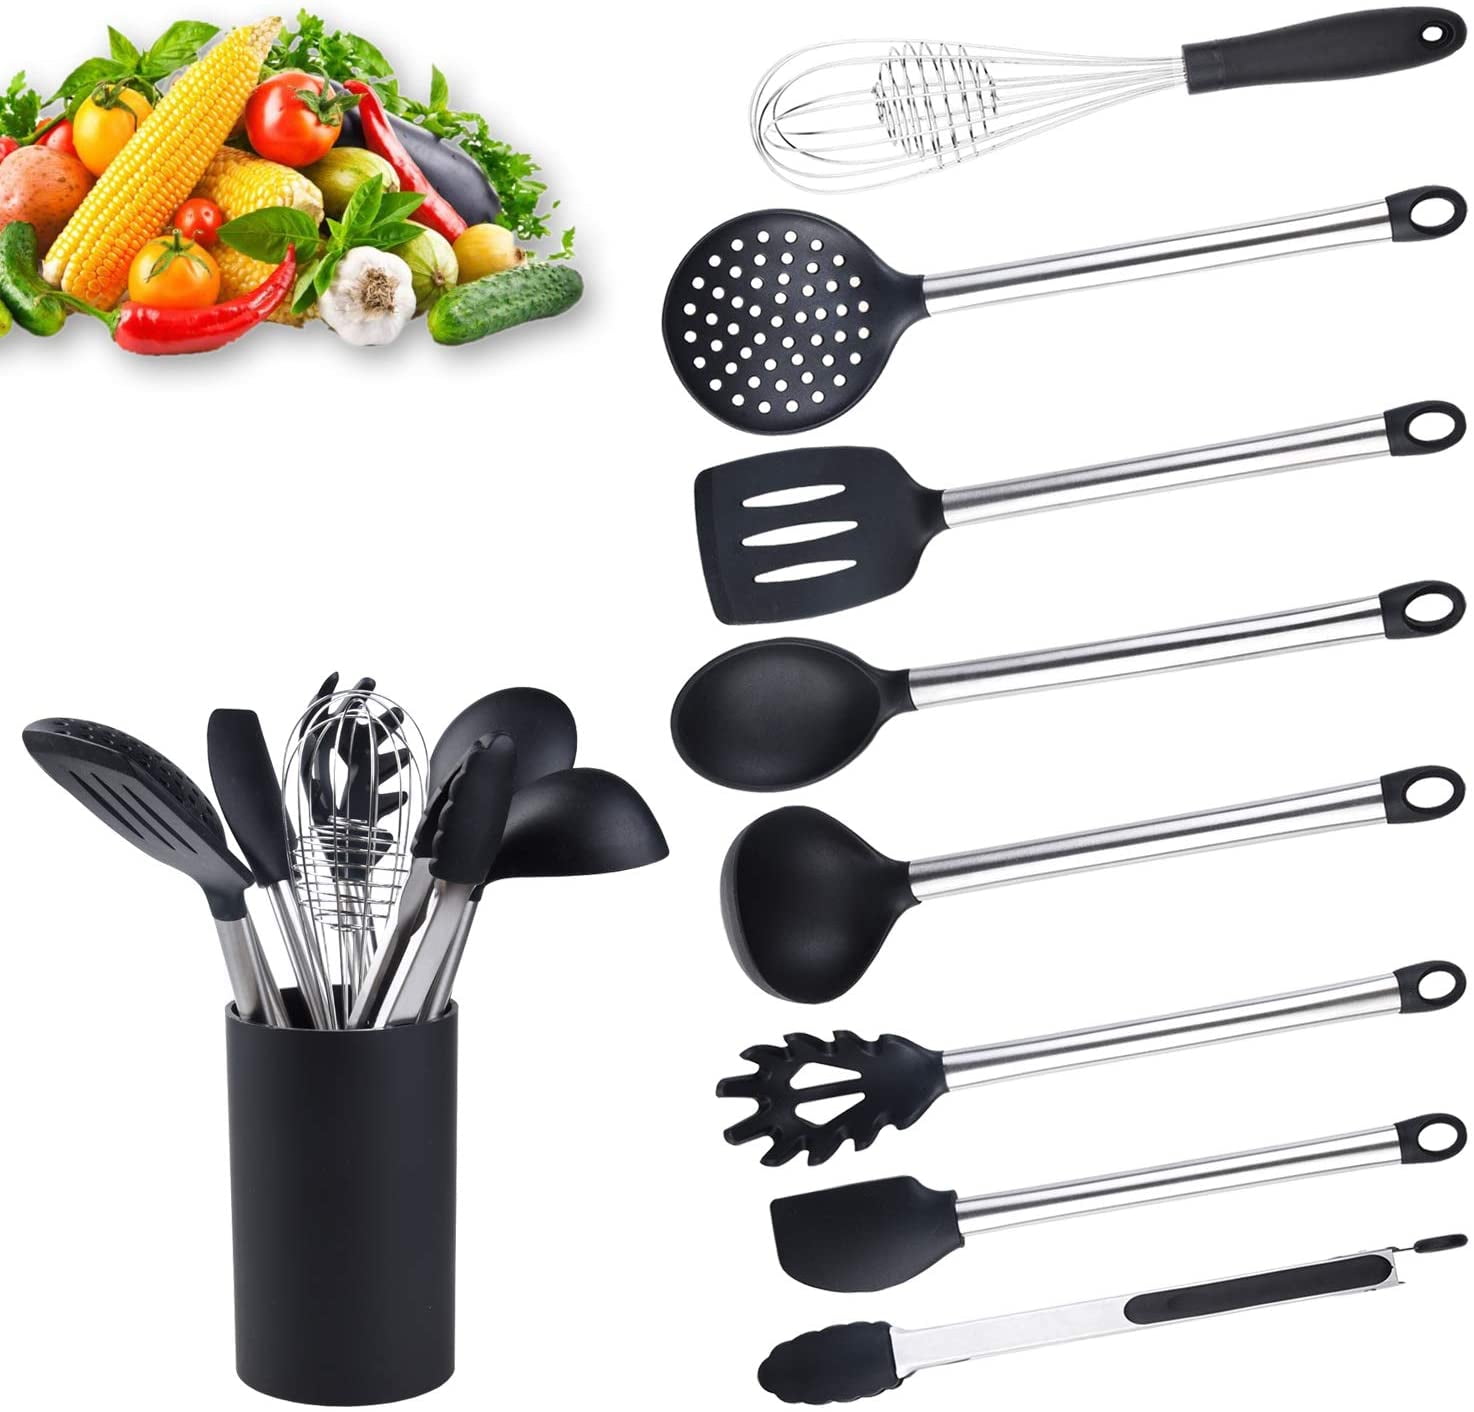 Ladle/Slotted Spoon/Spatula Outdoor Camping Utensils Kitchen Cooking Tool